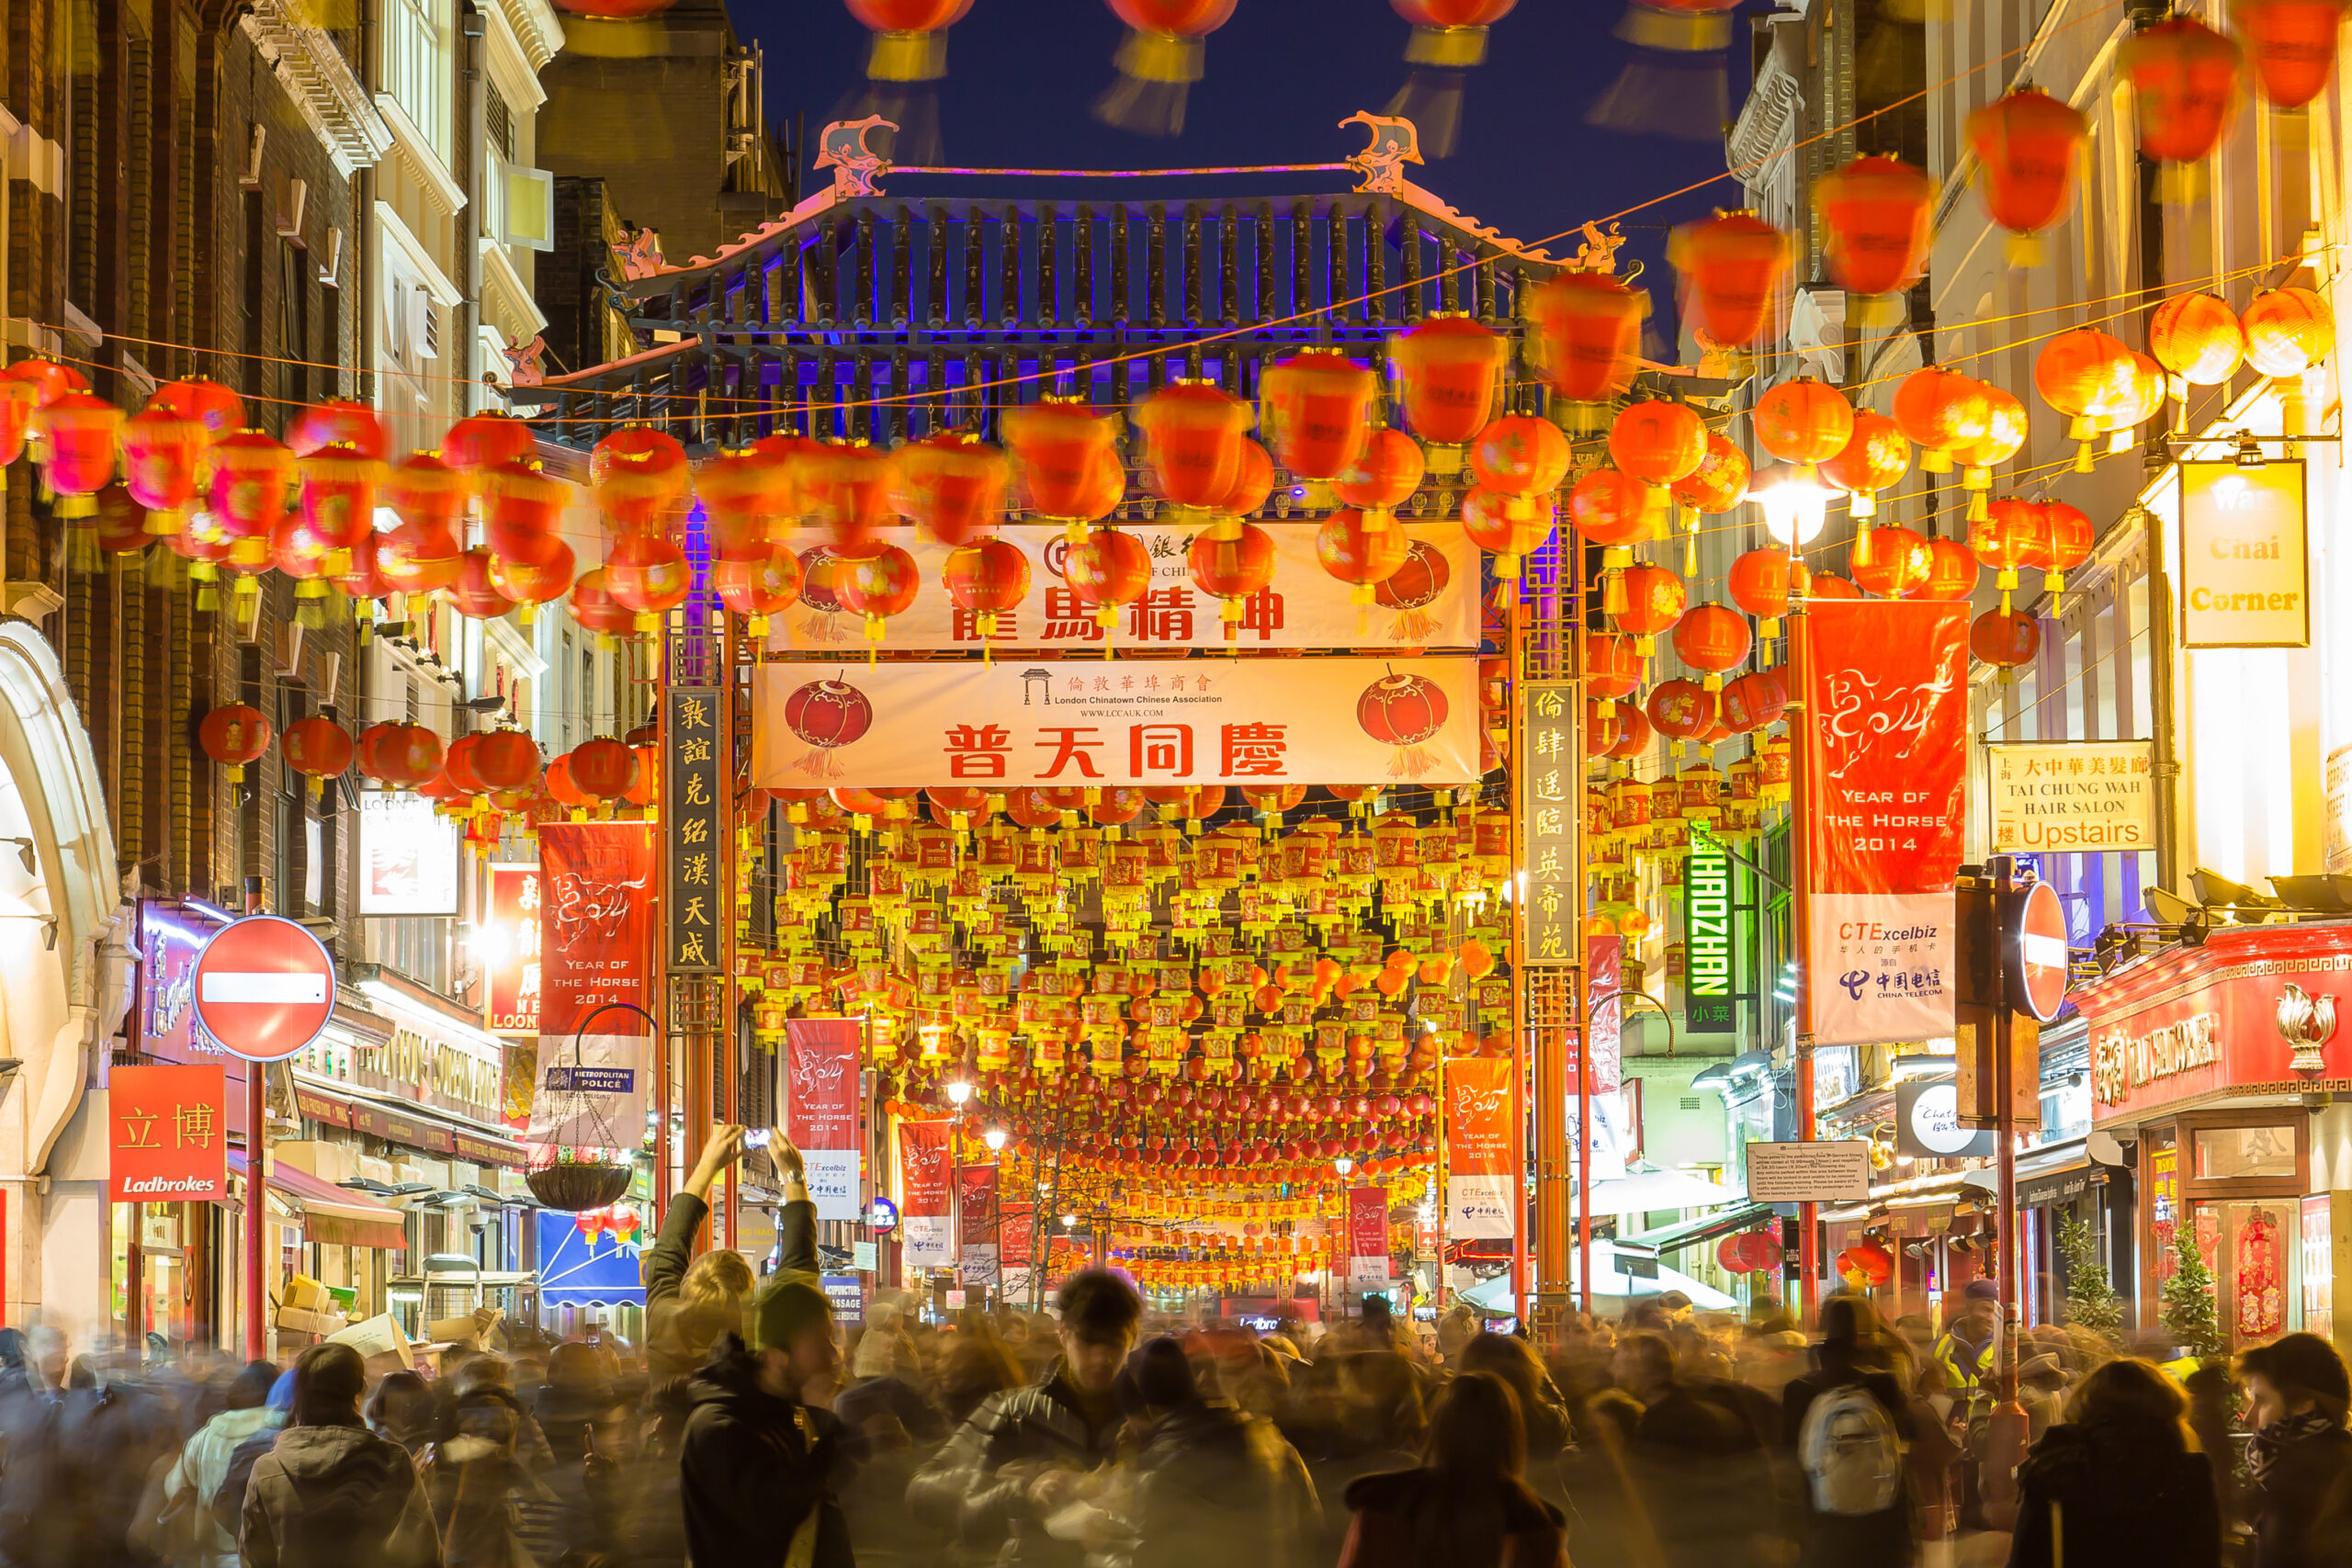 Hundreds of red lanterns hanging above Chinatown, London, during the Chinese New Year celebrations.